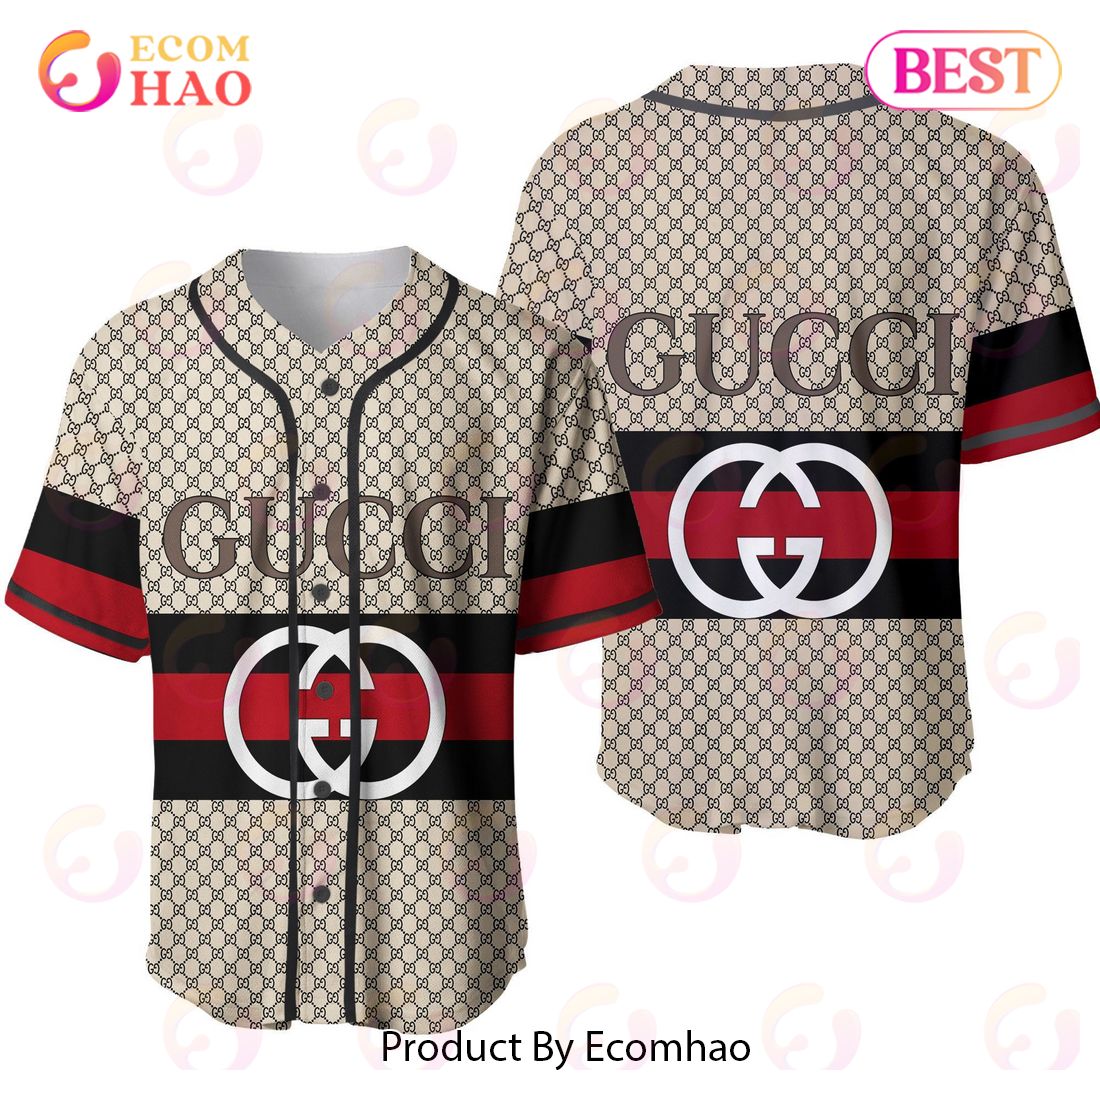 Gucci Brown Black Red Luxury Brand Jersey Limited Edition